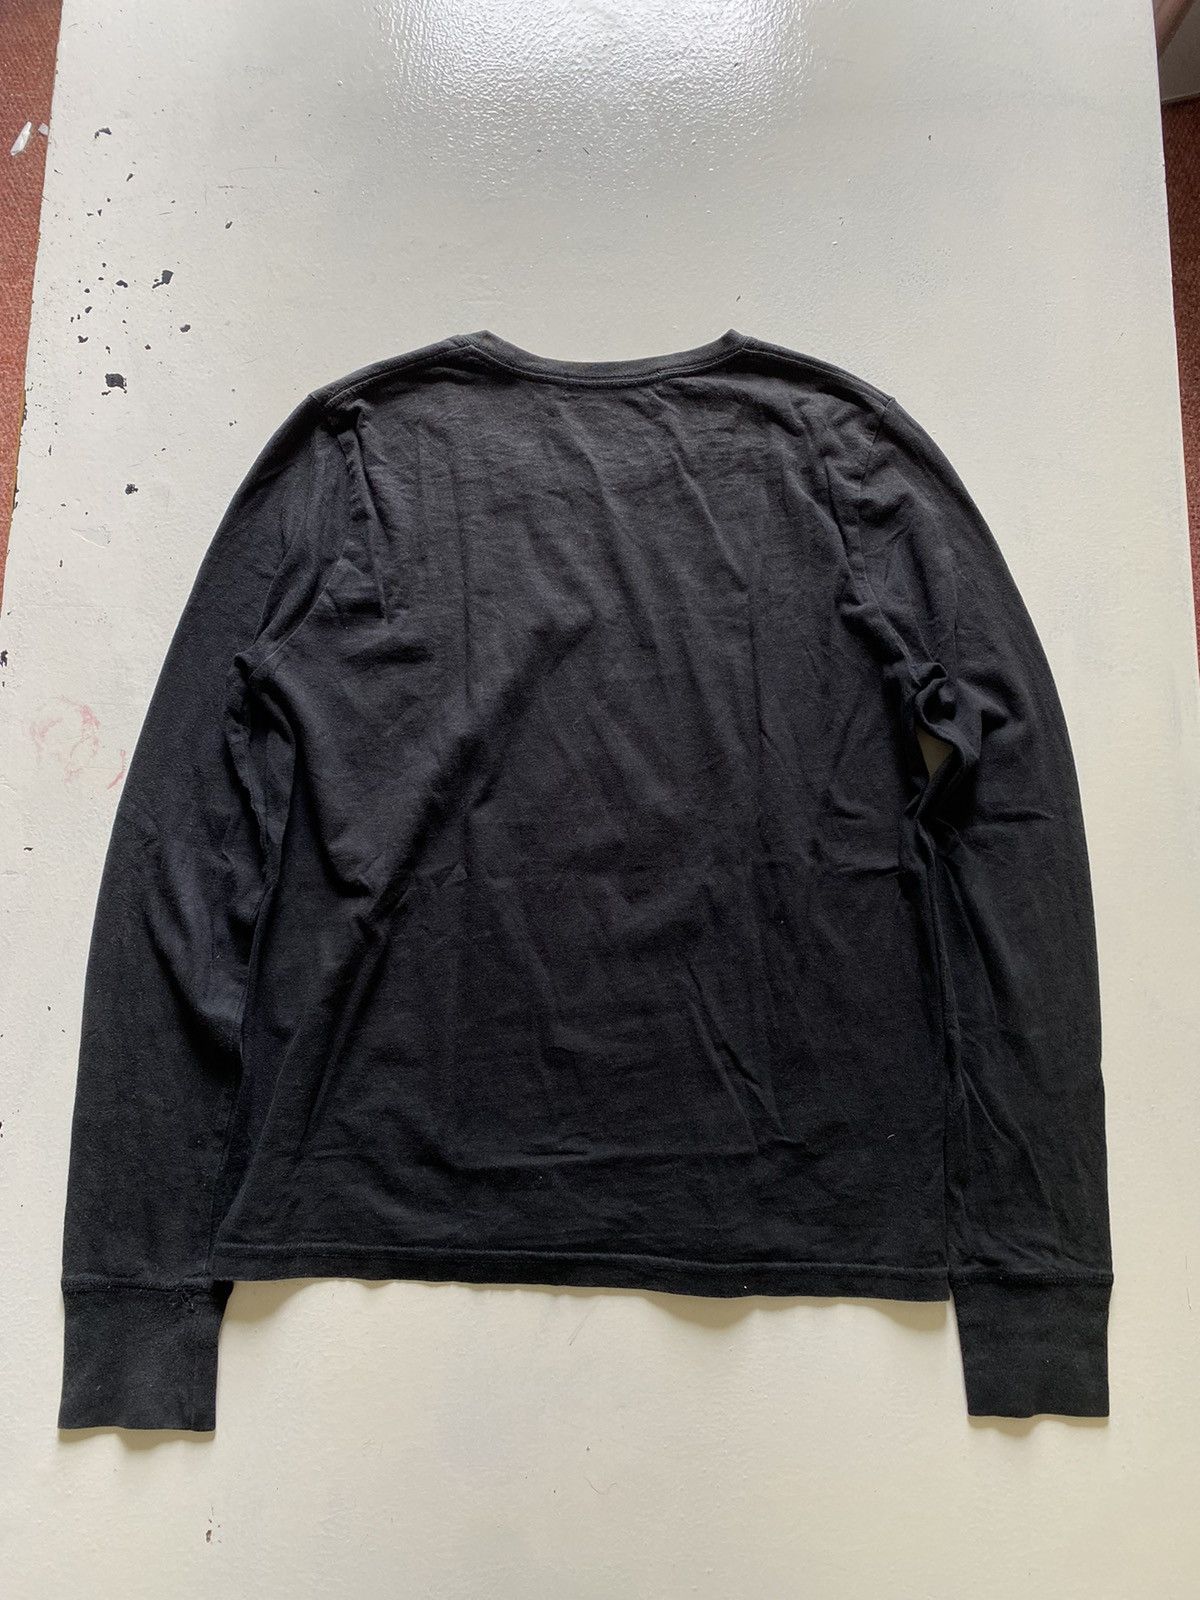 Undercover Undercover long sleeve T-shirt | Grailed